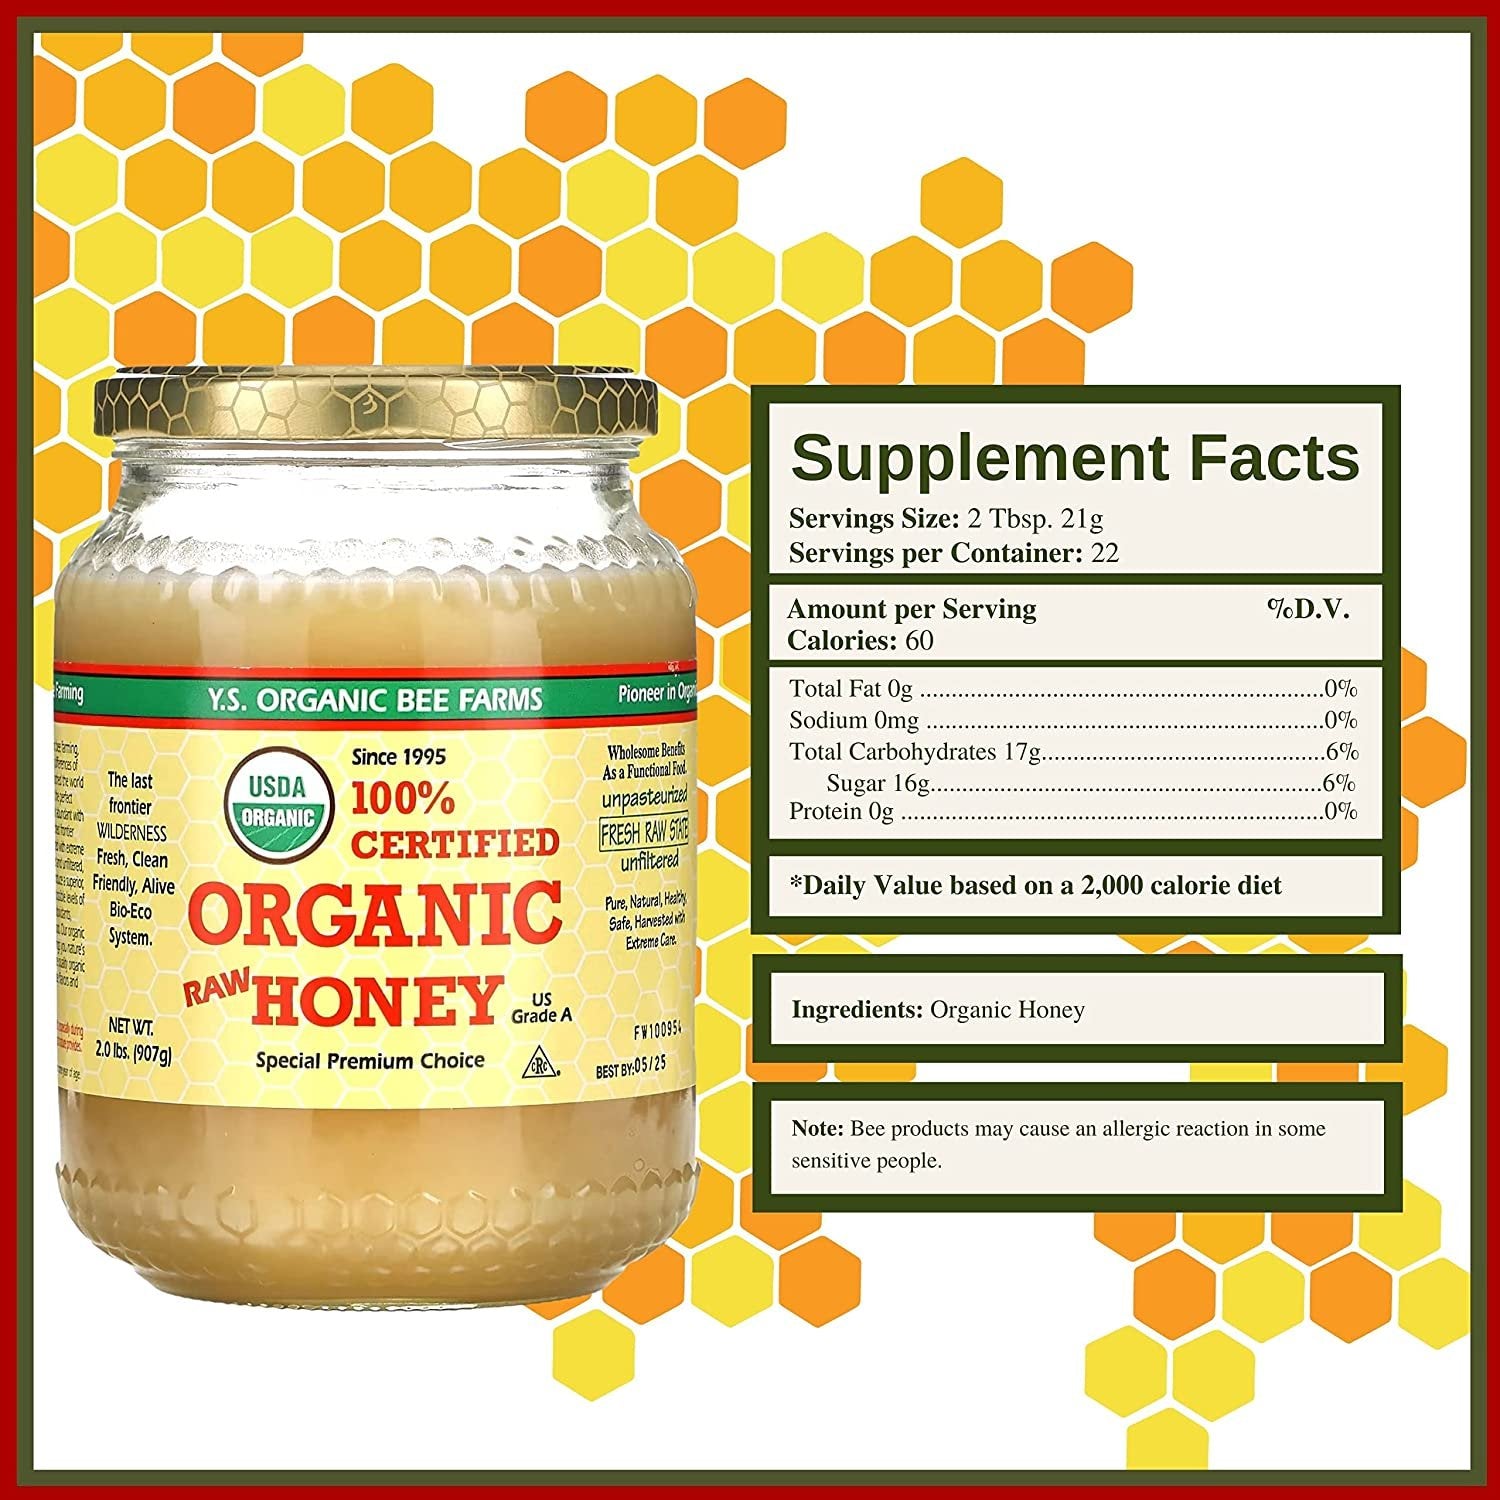 Y.S. Organic Bee Farms, 100% Certified Y.S. Organic Raw Honey, Unpasteurized, Unfiltered, Fresh Raw State, Kosher, Pure, Natural, Healthy, Safe, Gluten Free, Harvested with Extreme Care, 2 Lb (6)